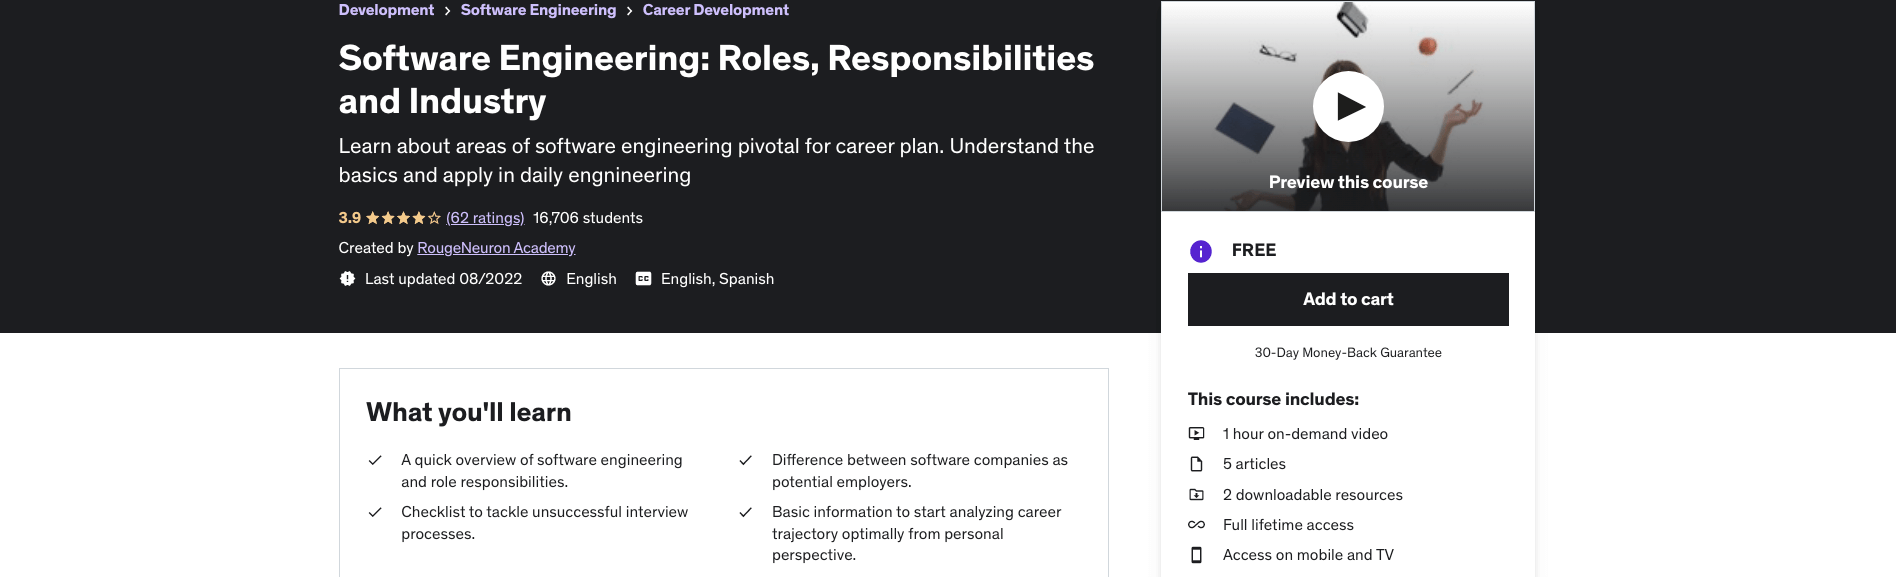 Software Engineering: Roles, Responsibilities and Industry